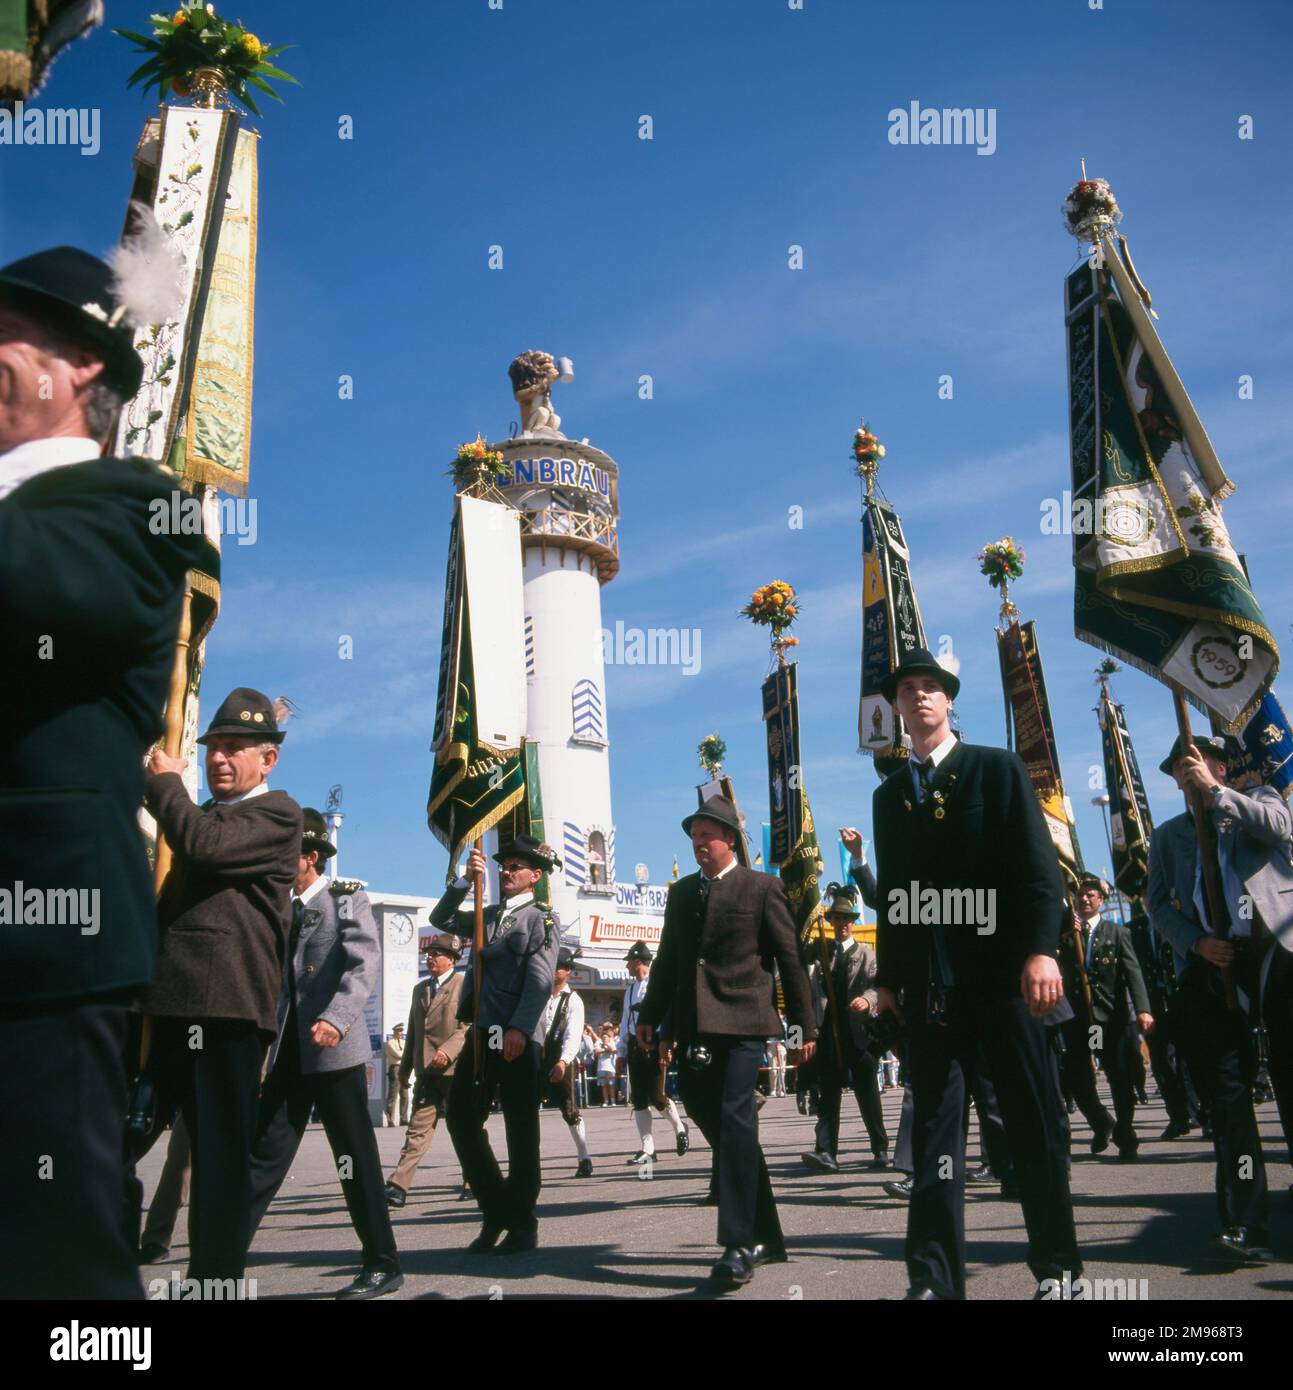 Scene at the Oktoberfest in Munich, Germany, with people in folk costume marching with flags, and the tower of the Lowenbrau Brewery in the background. Stock Photo